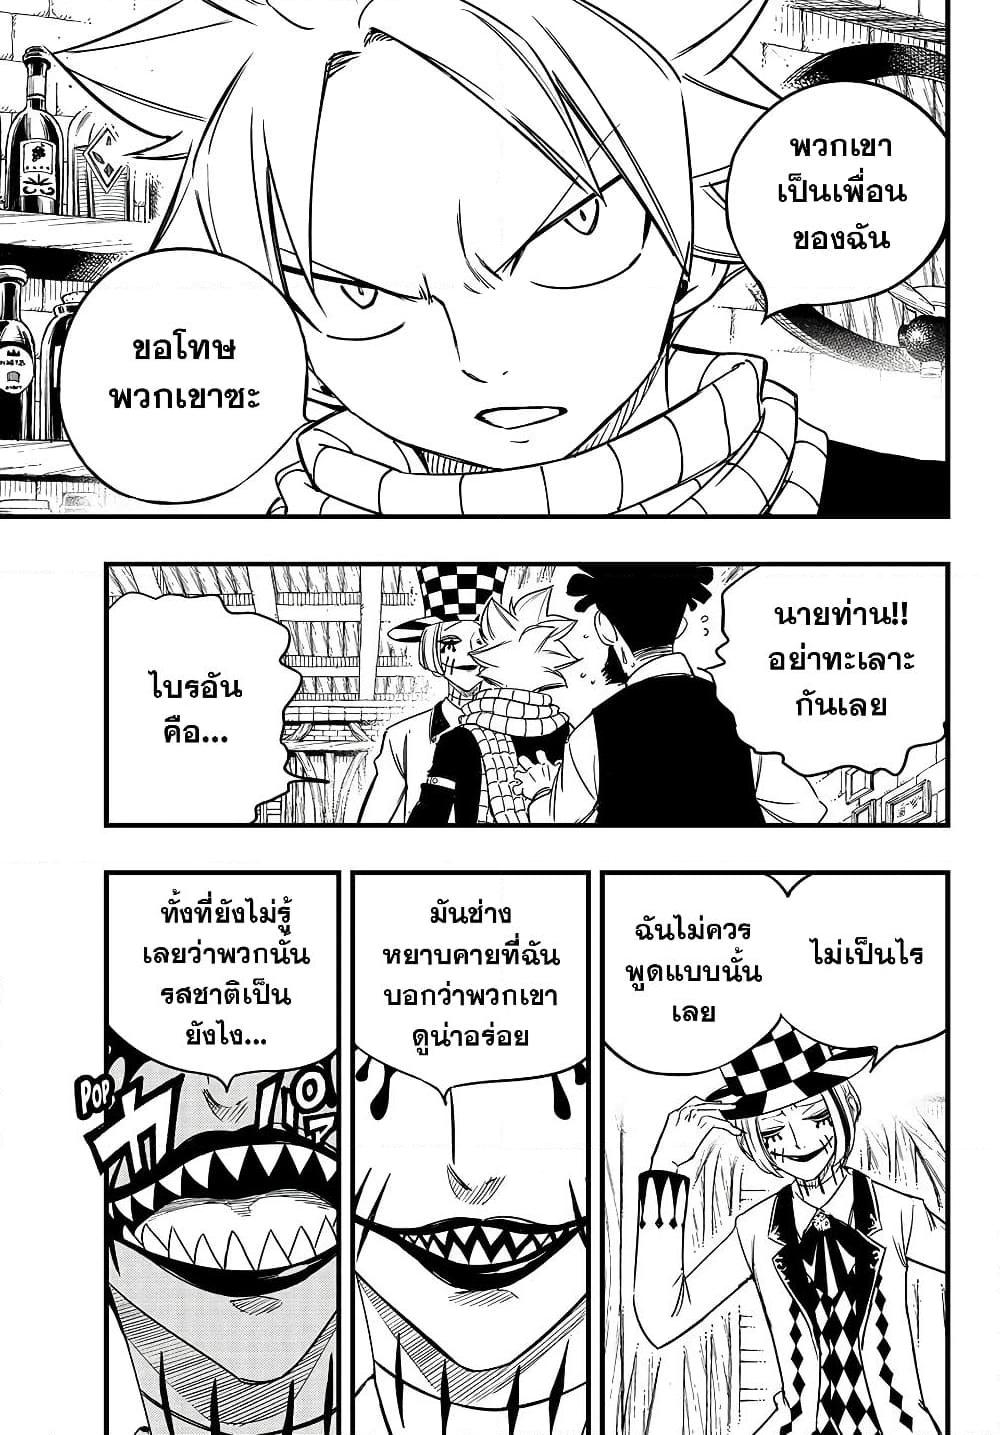 FairyTail 100 Years Quest 156